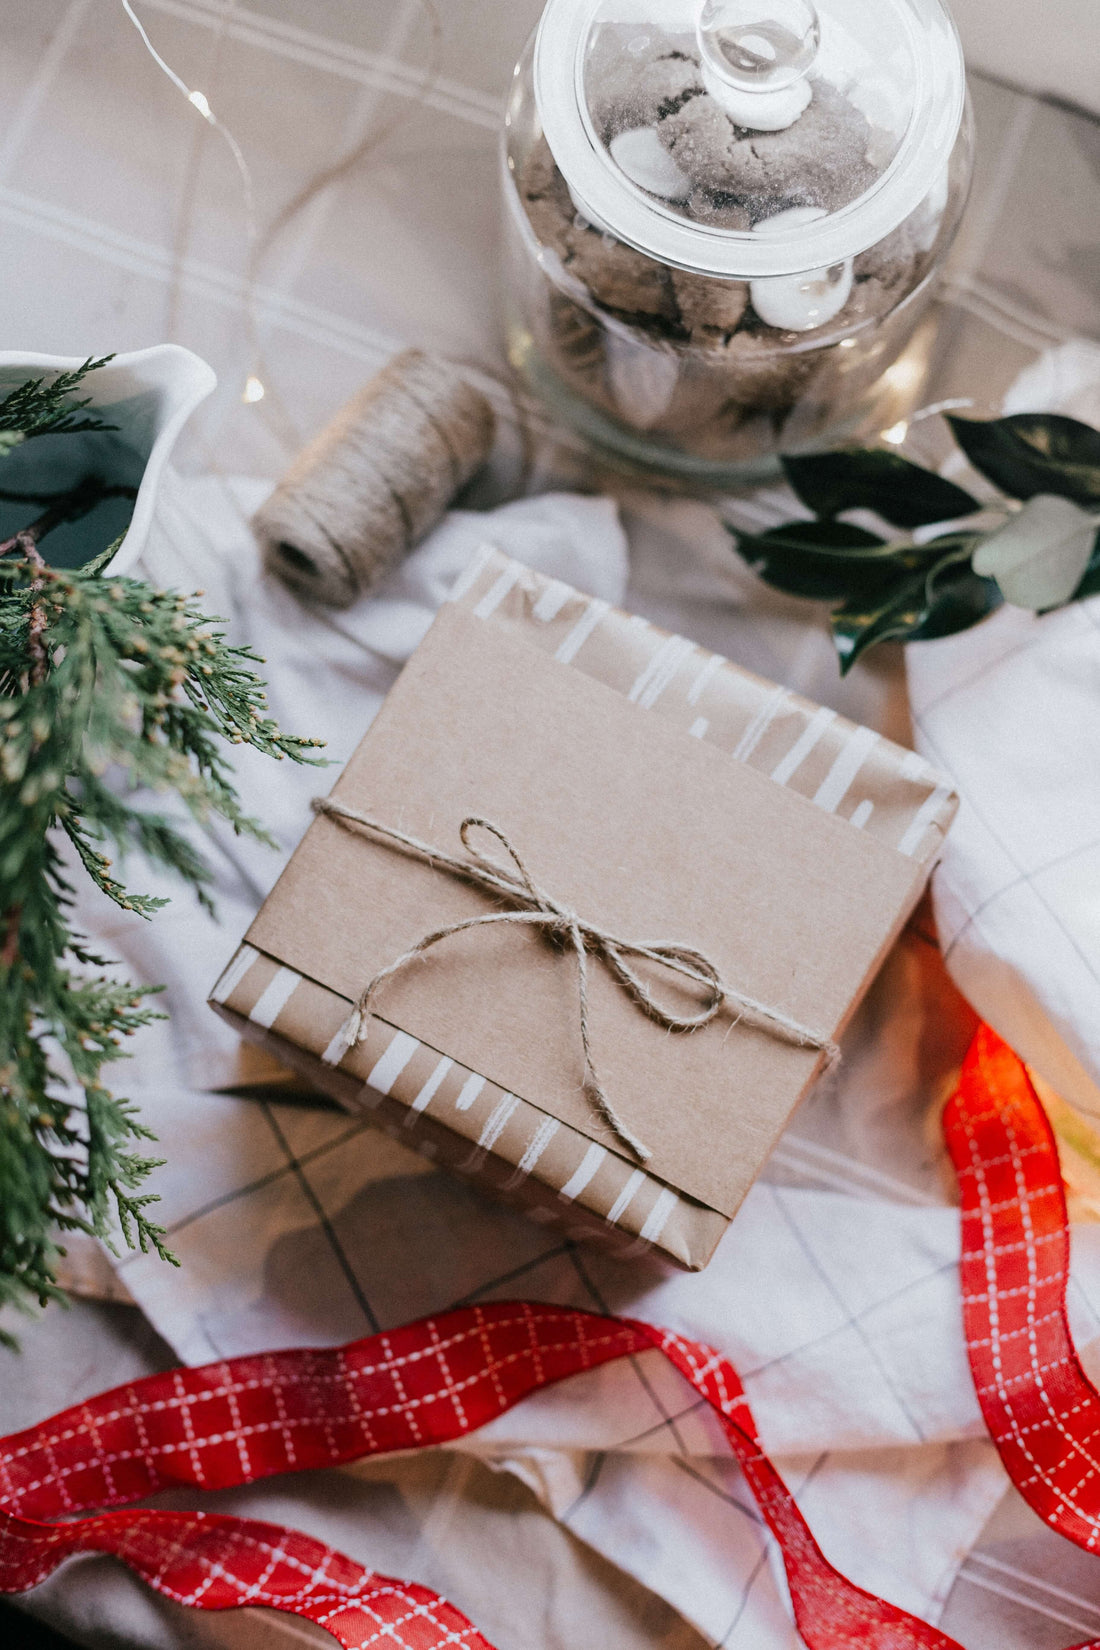 Gift Hacks that are Practical, Sustainable and Ethical